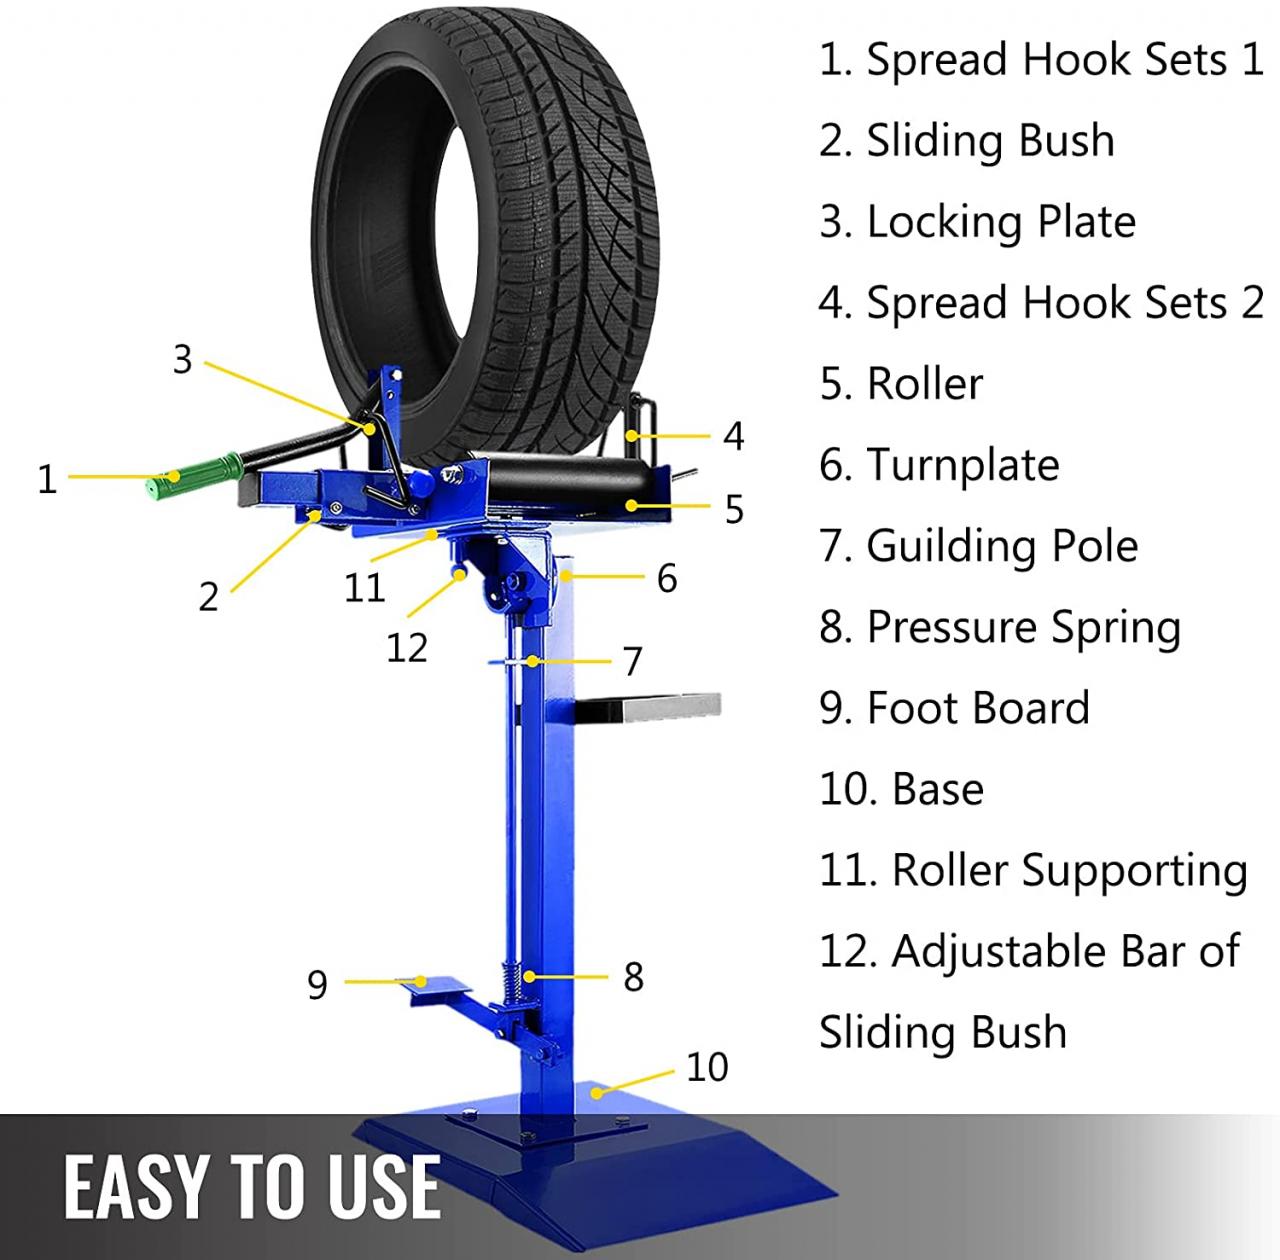 Buy Mophorn Manual Tire Spreader Portable Tire Changer with Stand  Adjustable Tire Spreader Tool for Light Truck and Car (Tire Spreader)  Online in Indonesia. B06XGWFW95